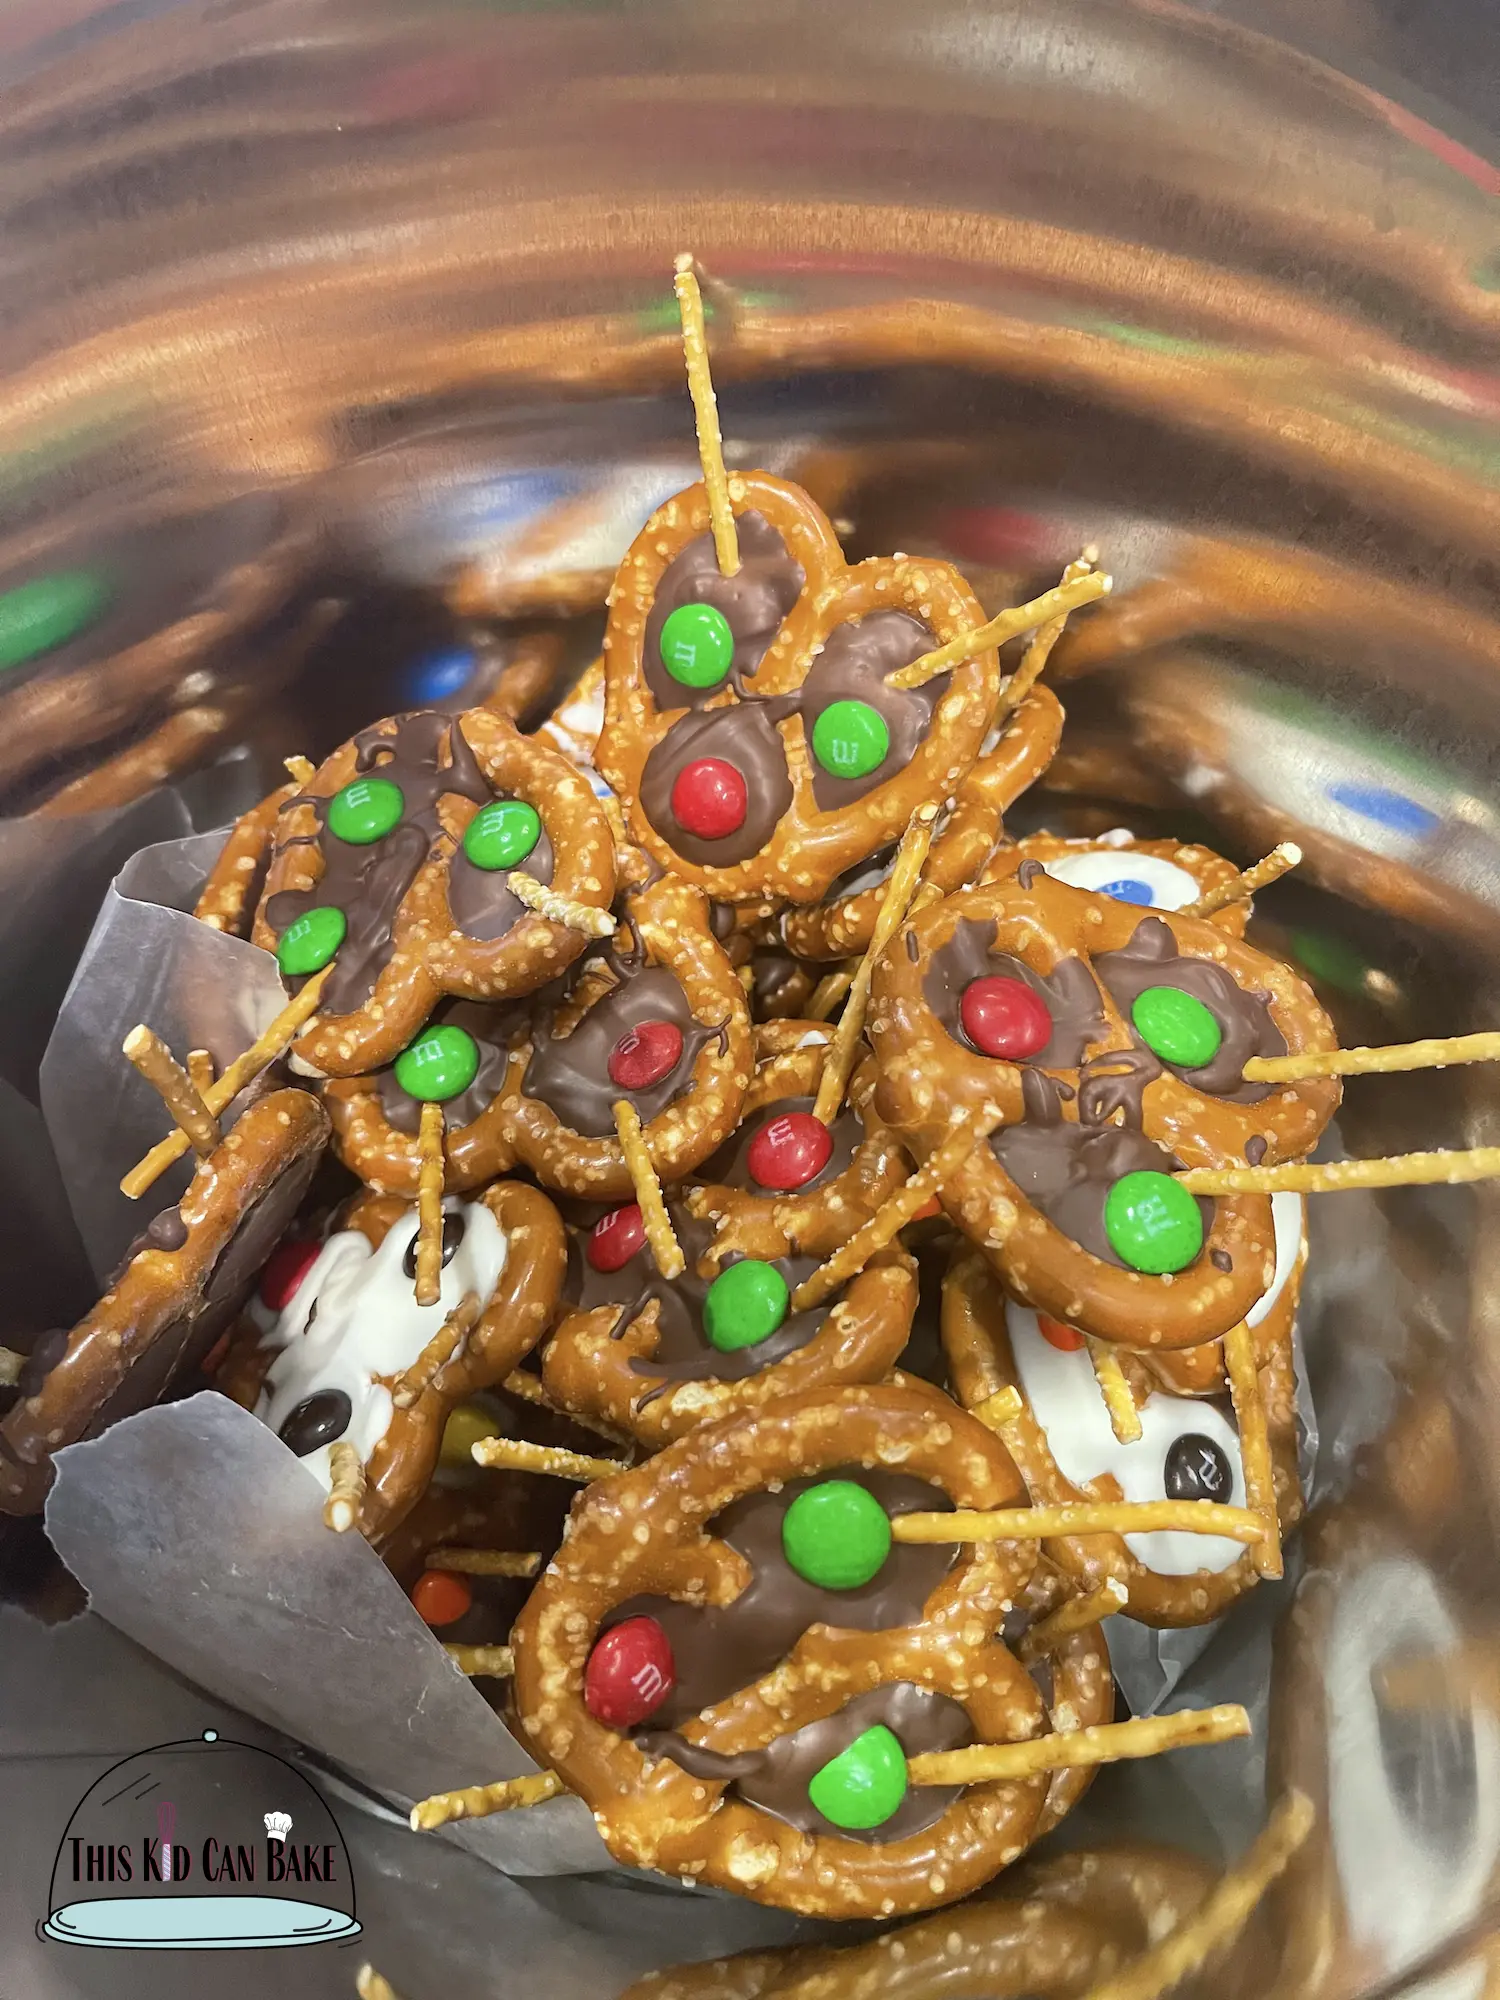 Make these yummy chocolate pretzel reindeer Christmas cookies! This Christmas treat is such a fun way to get kids involved in holiday baking!